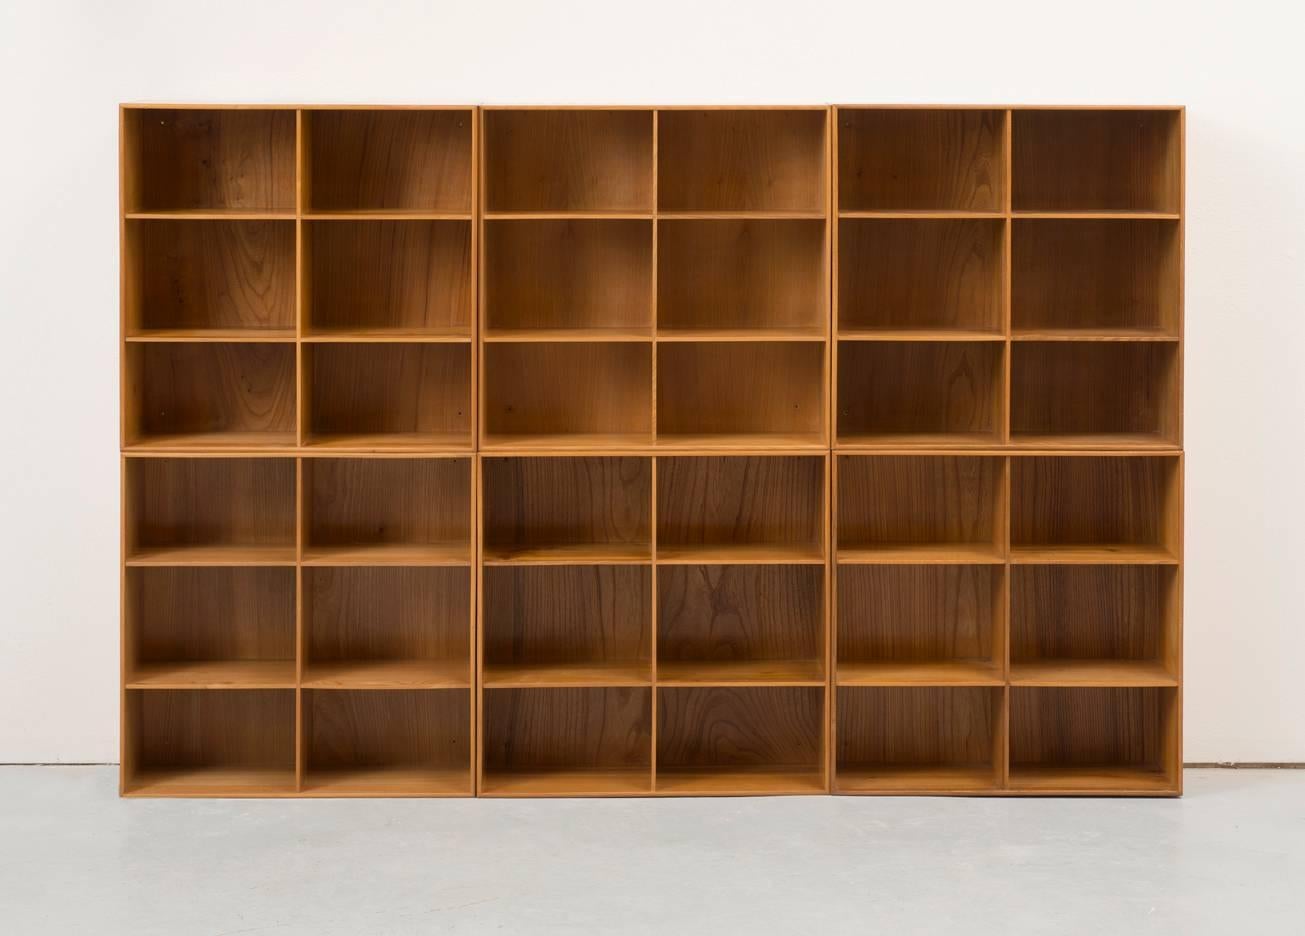 A rare set of six solid elm bookcases with dovetail joinery and brass fittings. This flexible, modular system allows for multiple configurations.